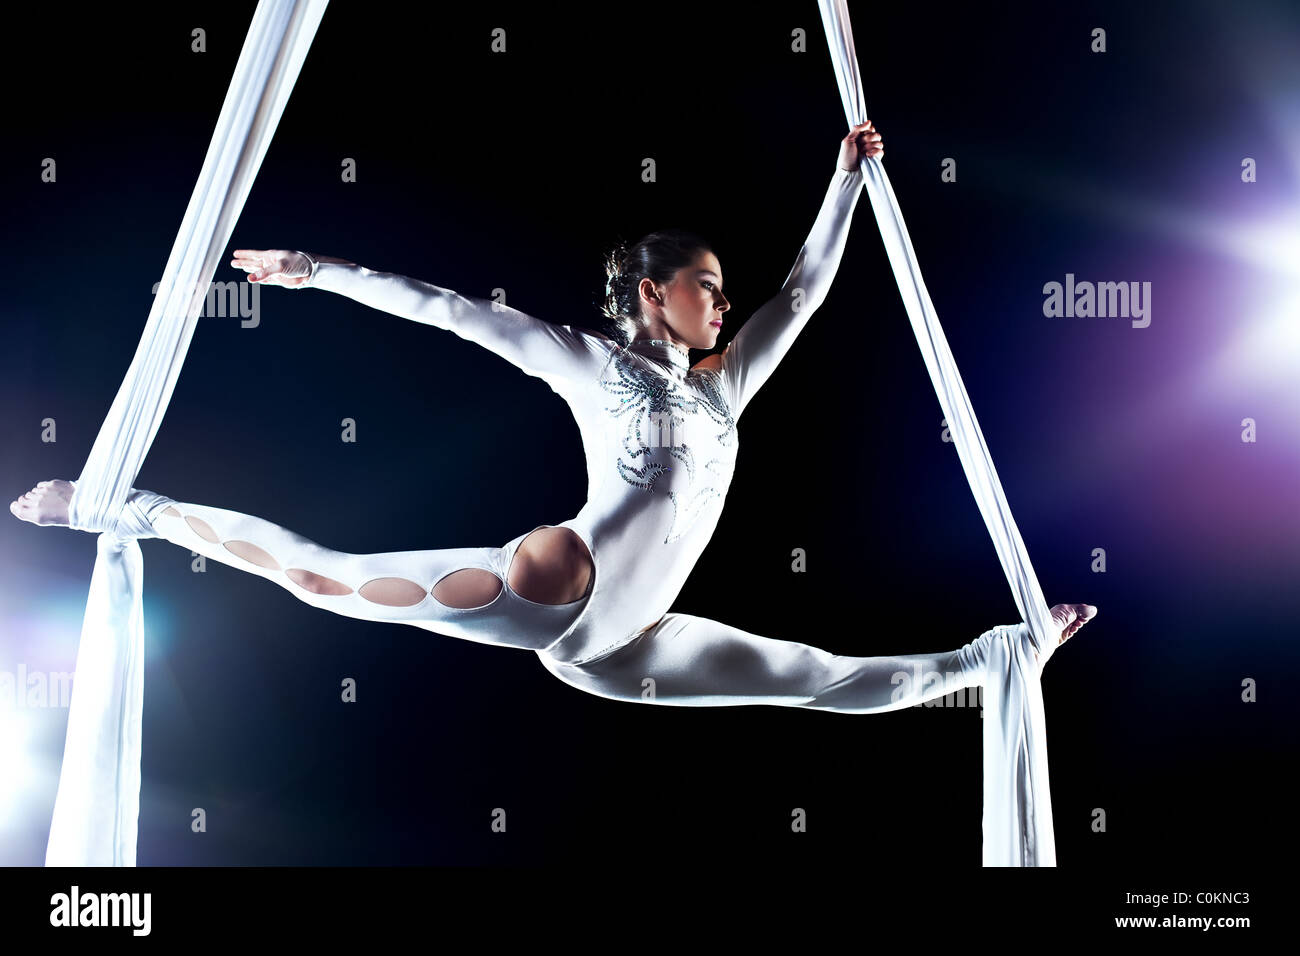 Young woman gymnast. On black background with flash effect. Stock Photo